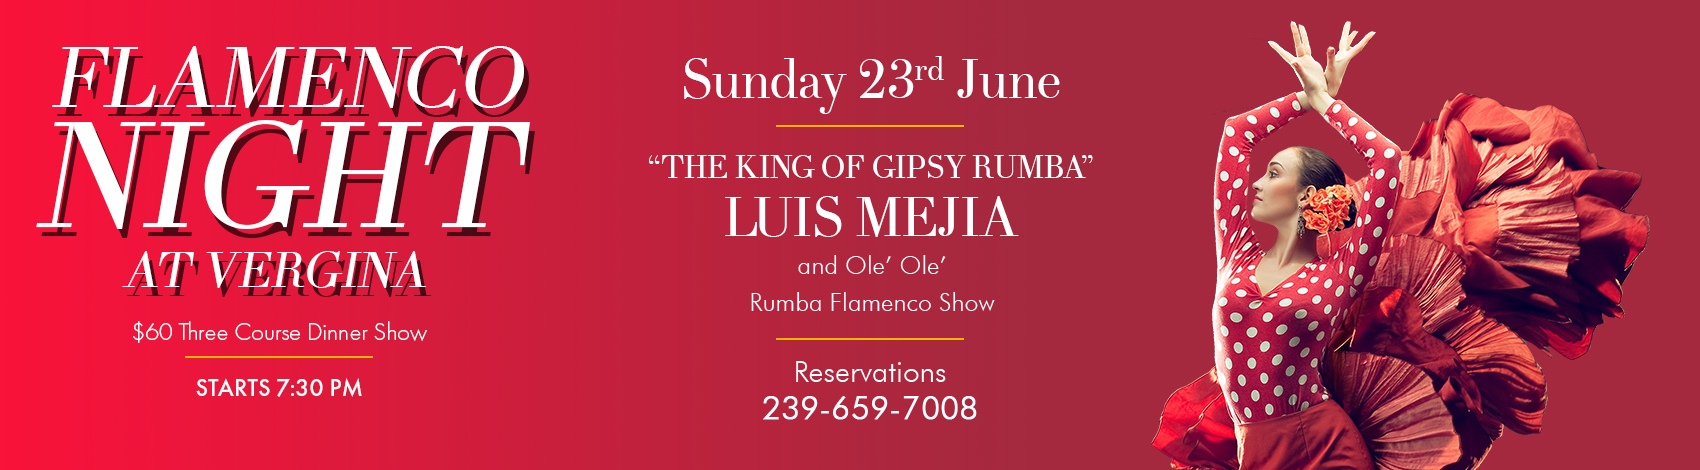 June 23rd The King of Gipsy Rumba LUIS MEJIA and Ole’ Ole’ Rumba Flamenco Show, Three Course Dinner Show Menu $60 Per Person